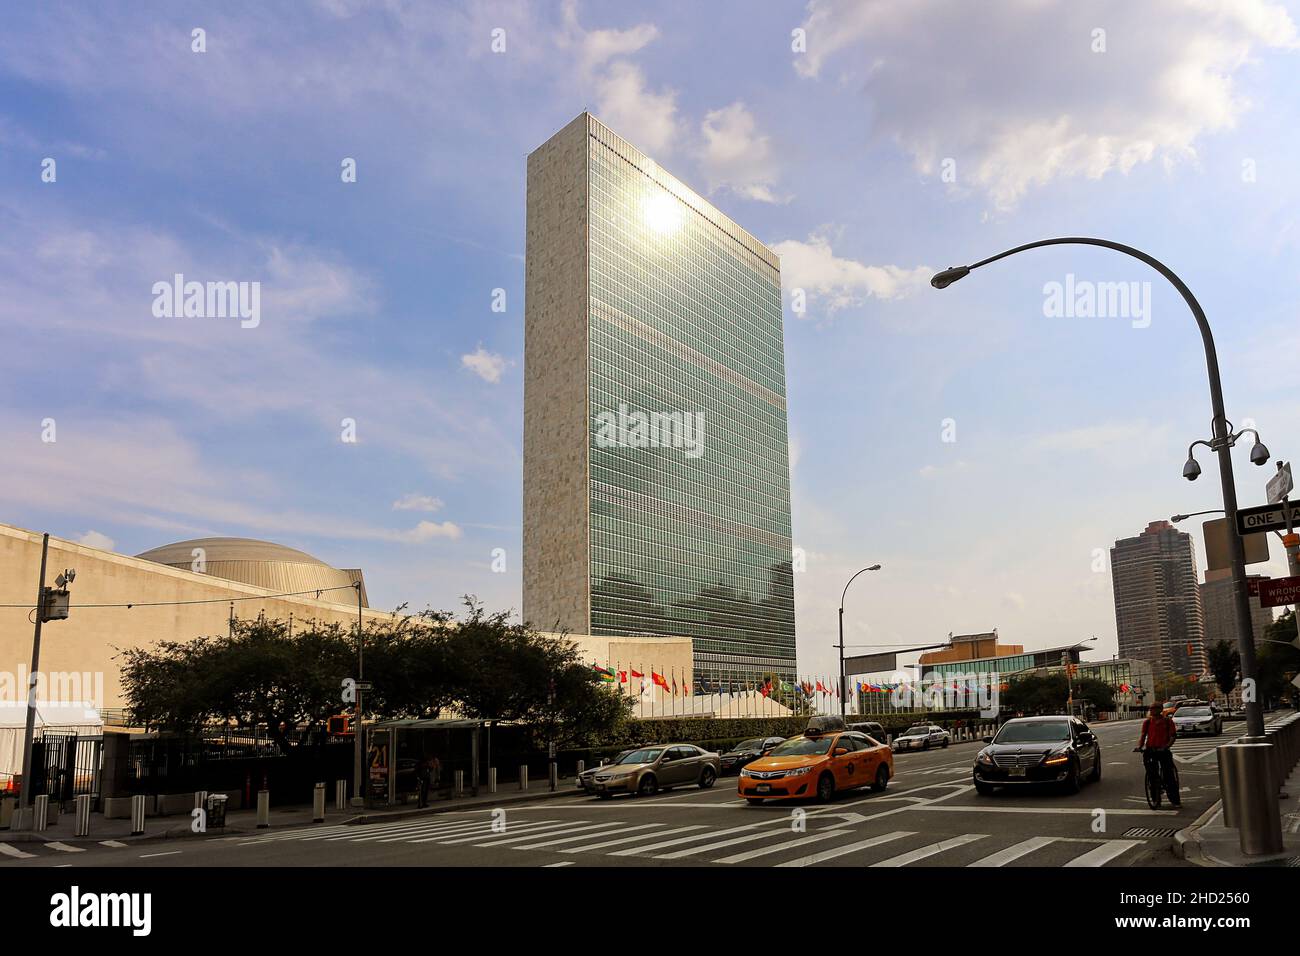 United Nations Headquarter Building in New York, the official headquarters of the UN since 1952. New, York, NY, USA - September, 2015 Stock Photo